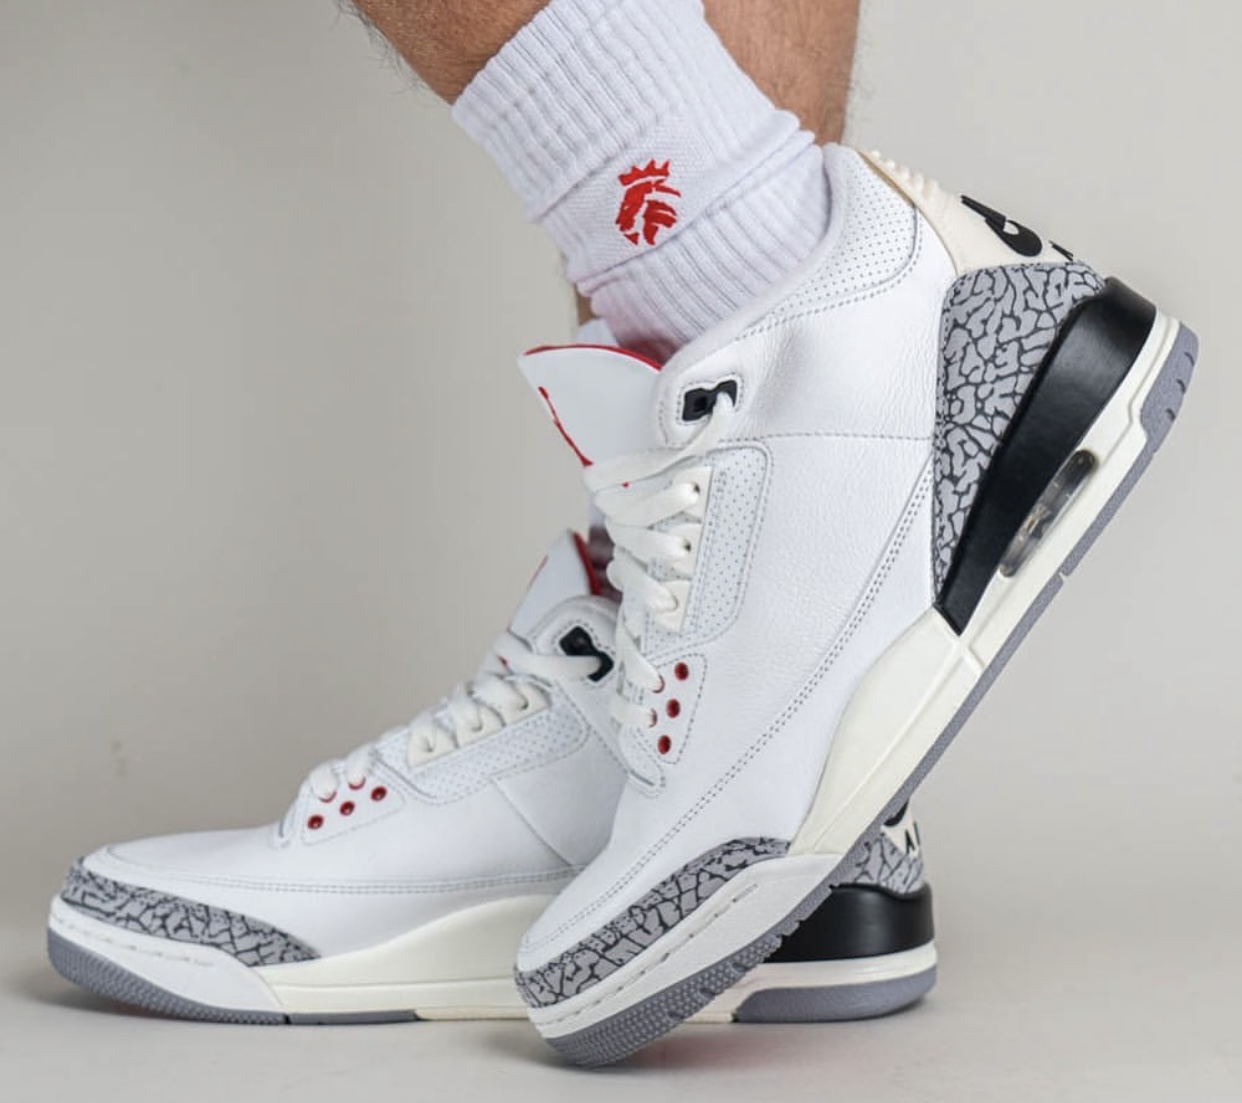 Air Jordan 3 White Cement Reimagined DN3707-100 Release Date On-Foot